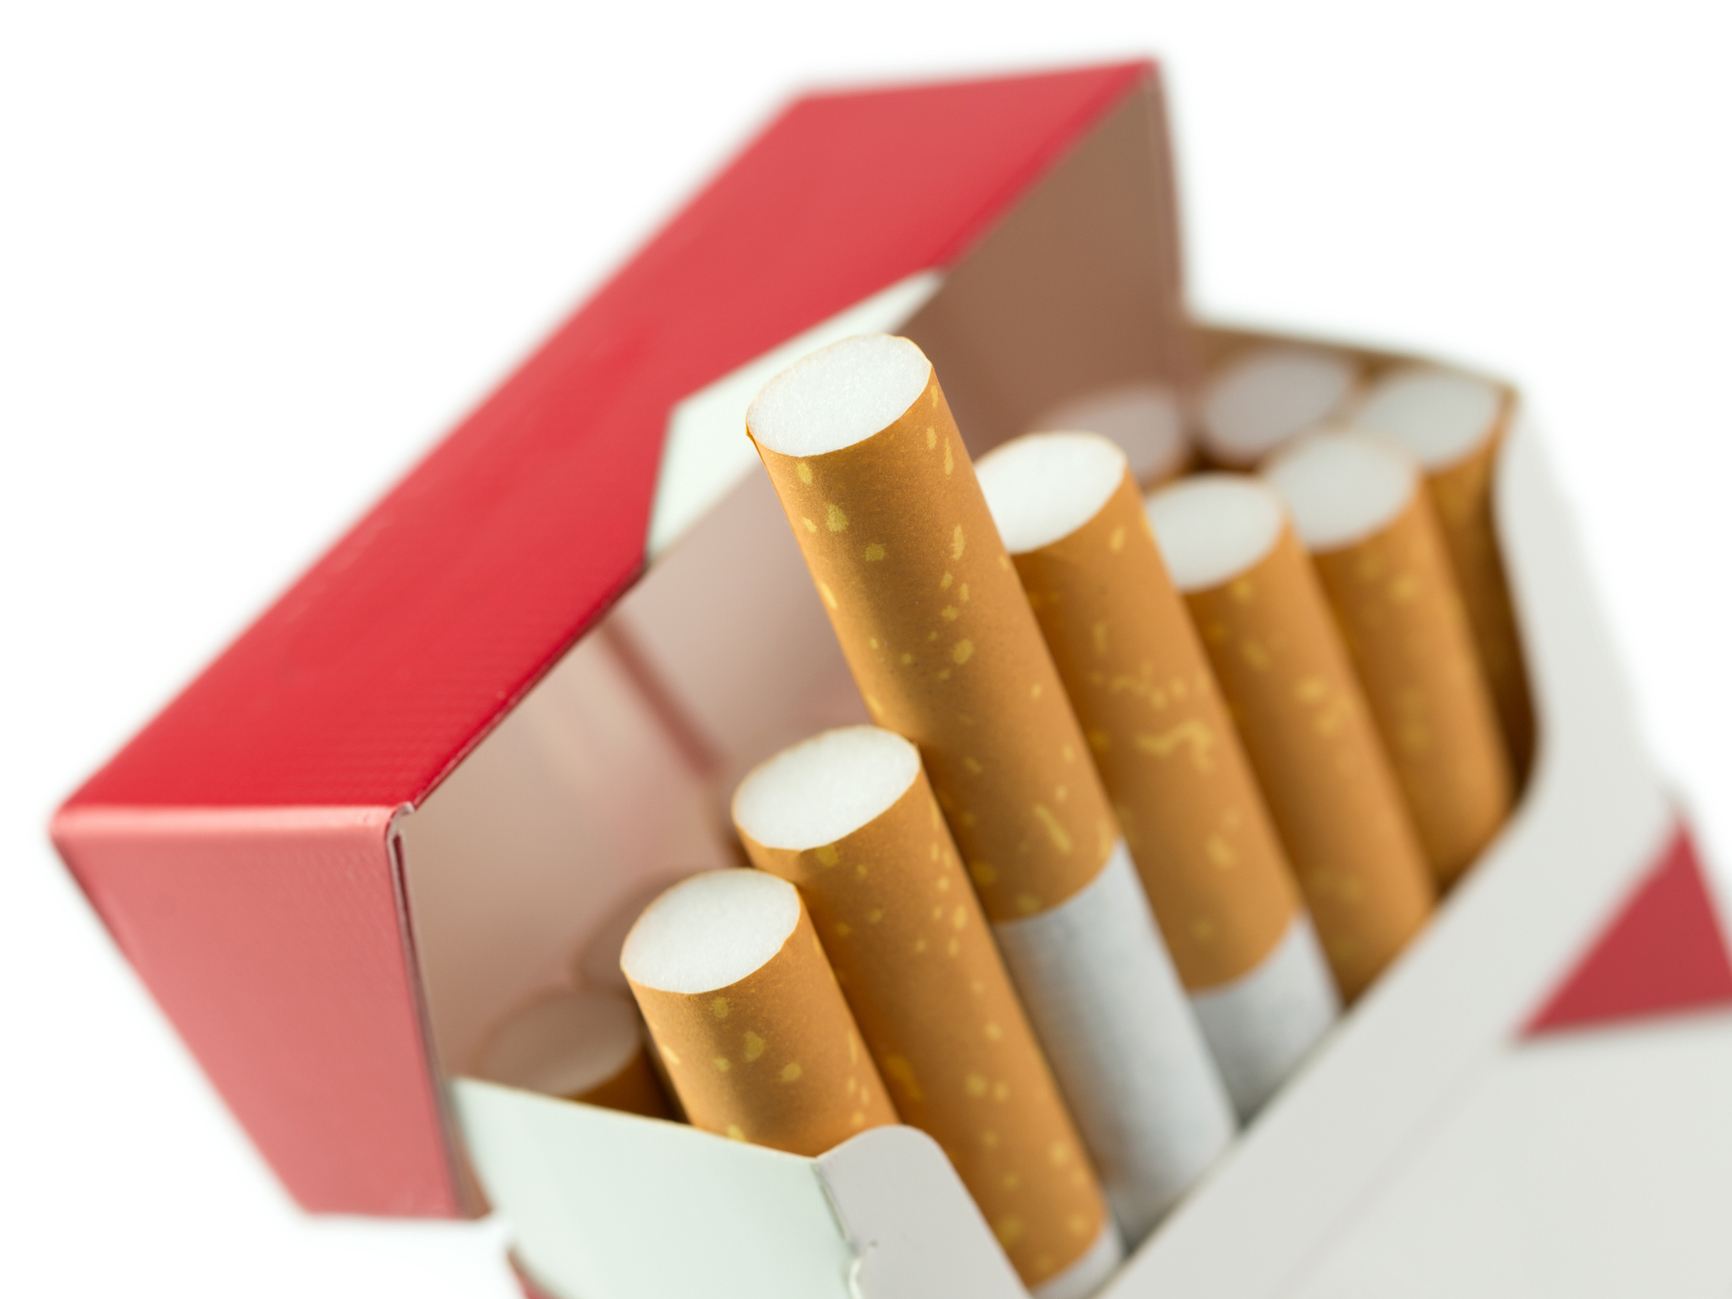 What happens when you cut a pack-a-day habit down to 5 cigarettes